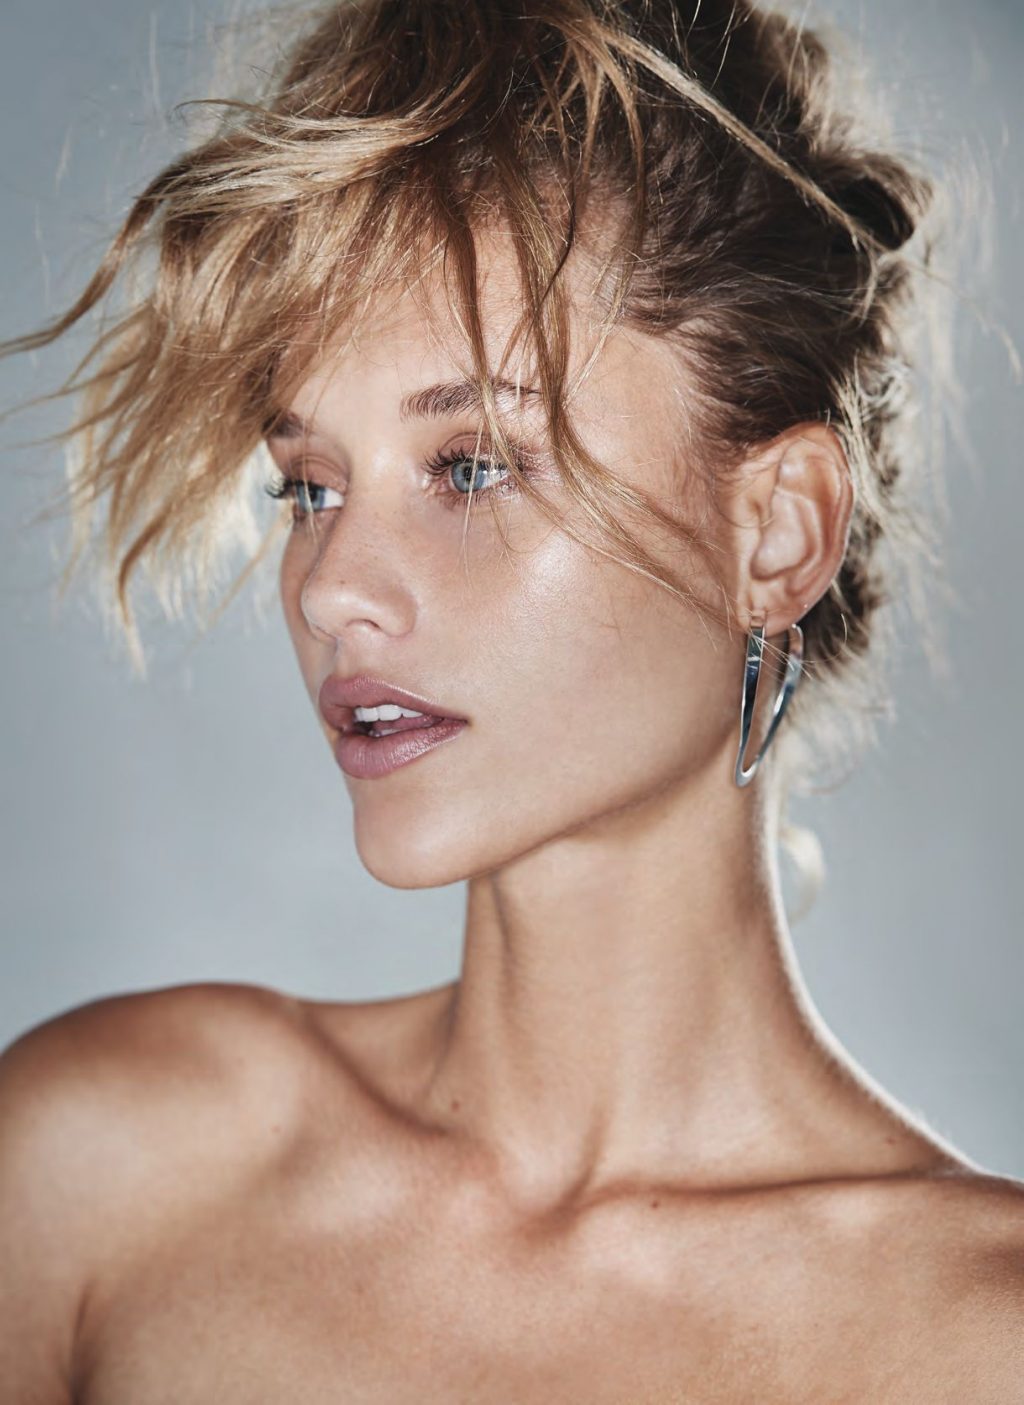 Chase carter nu
 #79516952